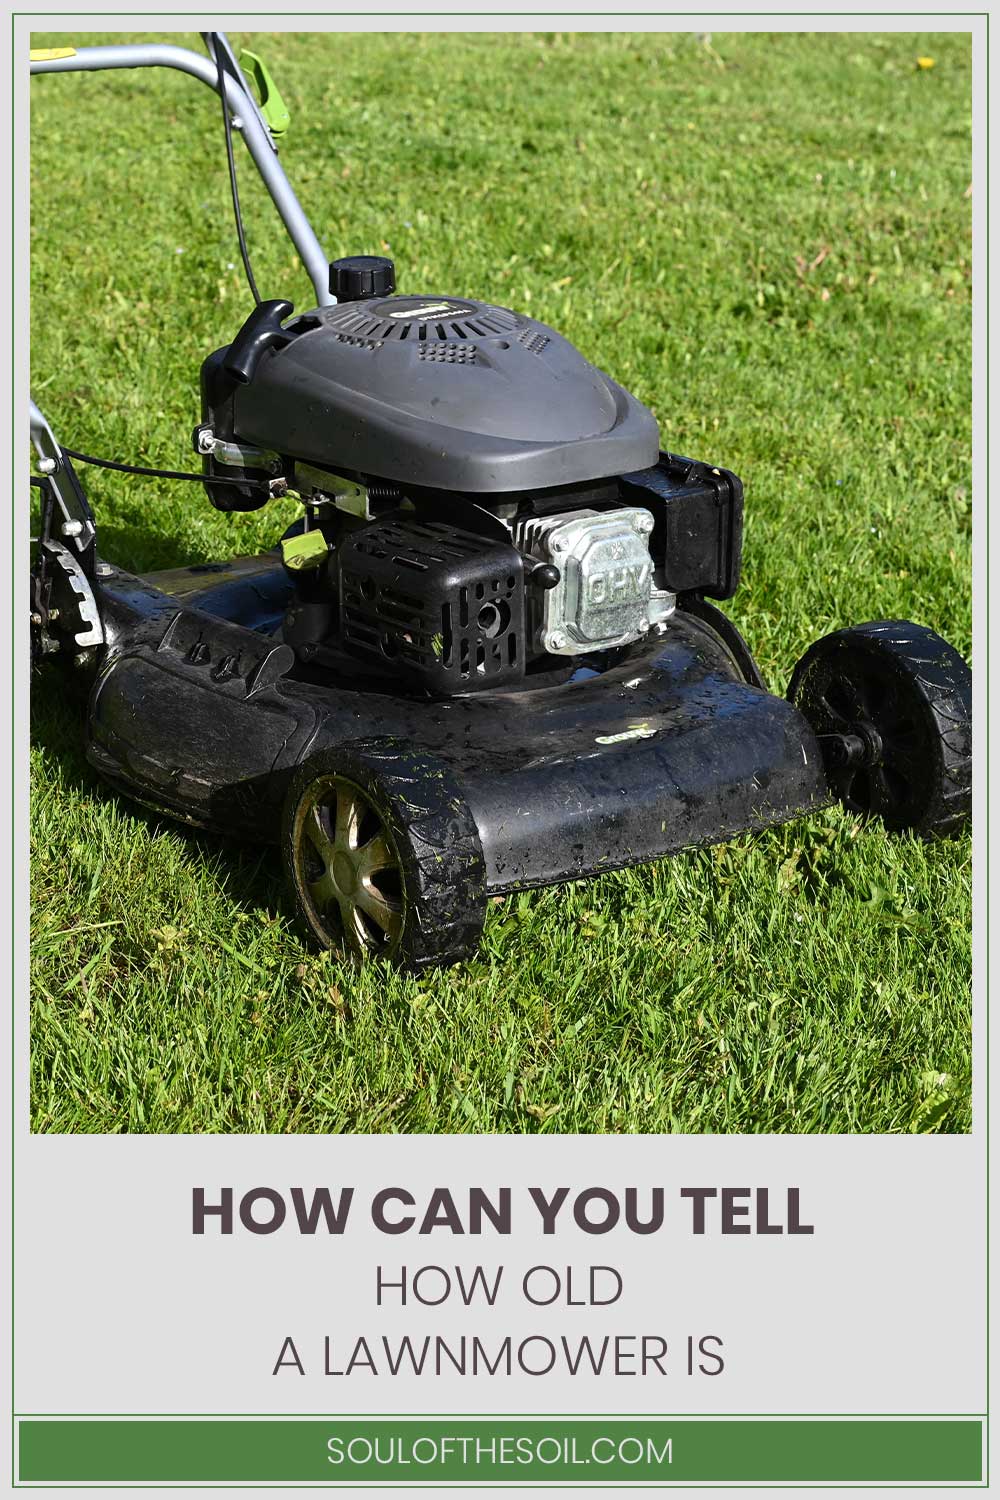 A lawnmower on a lawn - How Can You Tell How Old it Is?